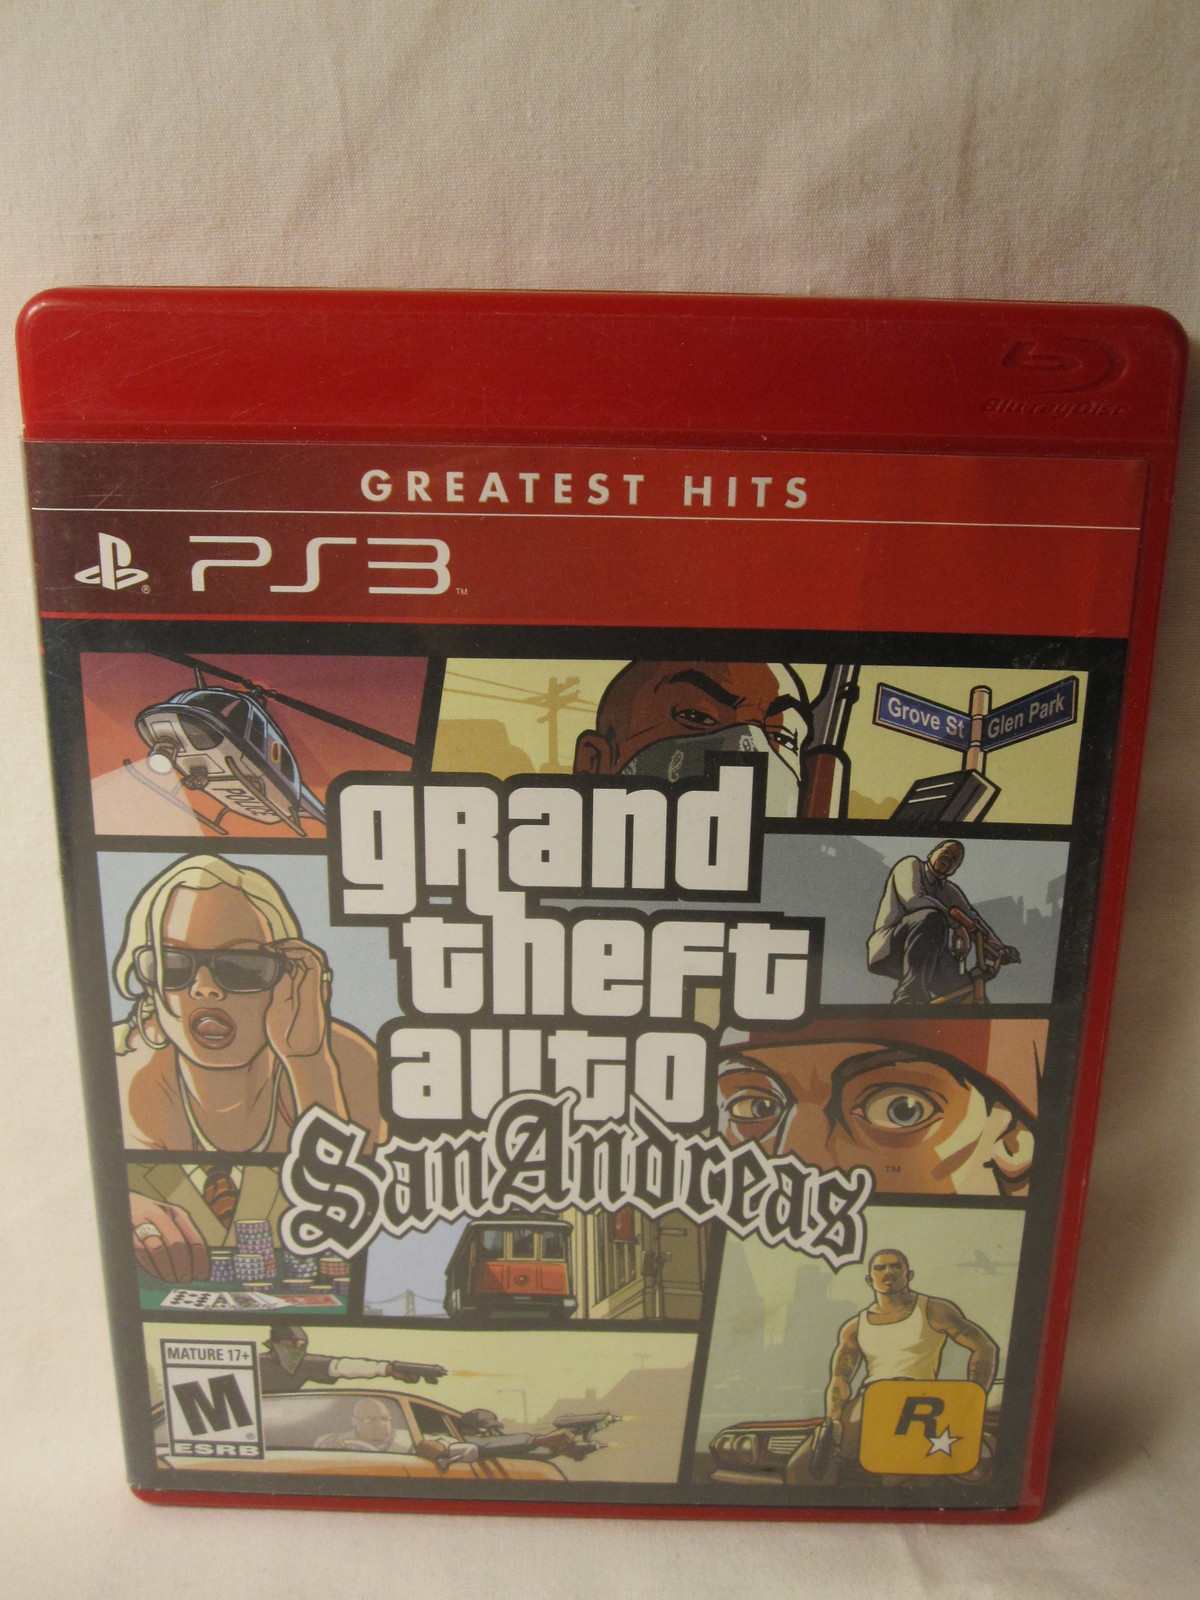 Primary image for Playstation 3 / PS3 Video Game: Grand Theft Auto, San Andreas - Greatest Hits